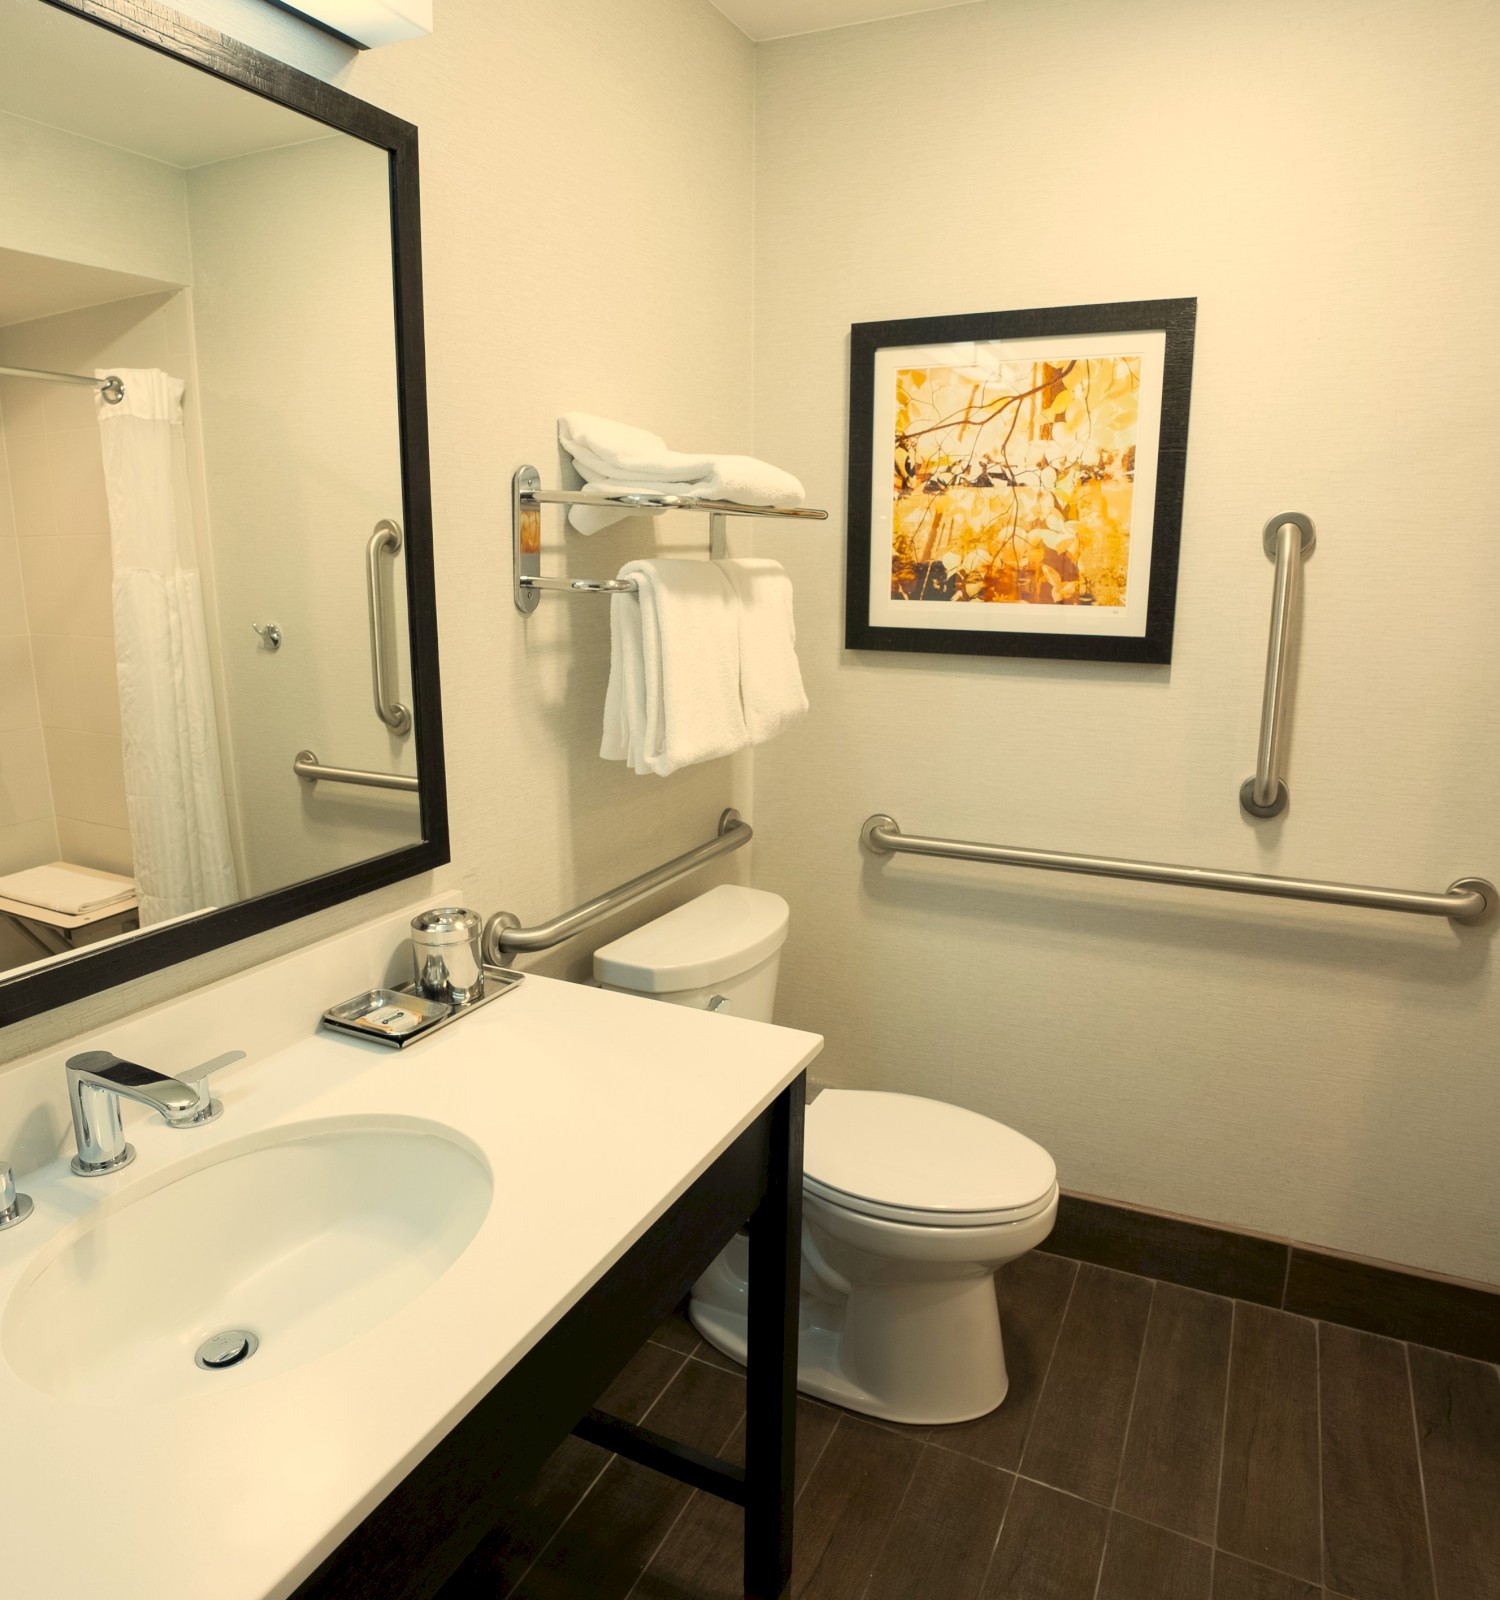 A bathroom with a sink, toilet, mirror, shower area, towel rack, handrails, and a framed picture on the wall .